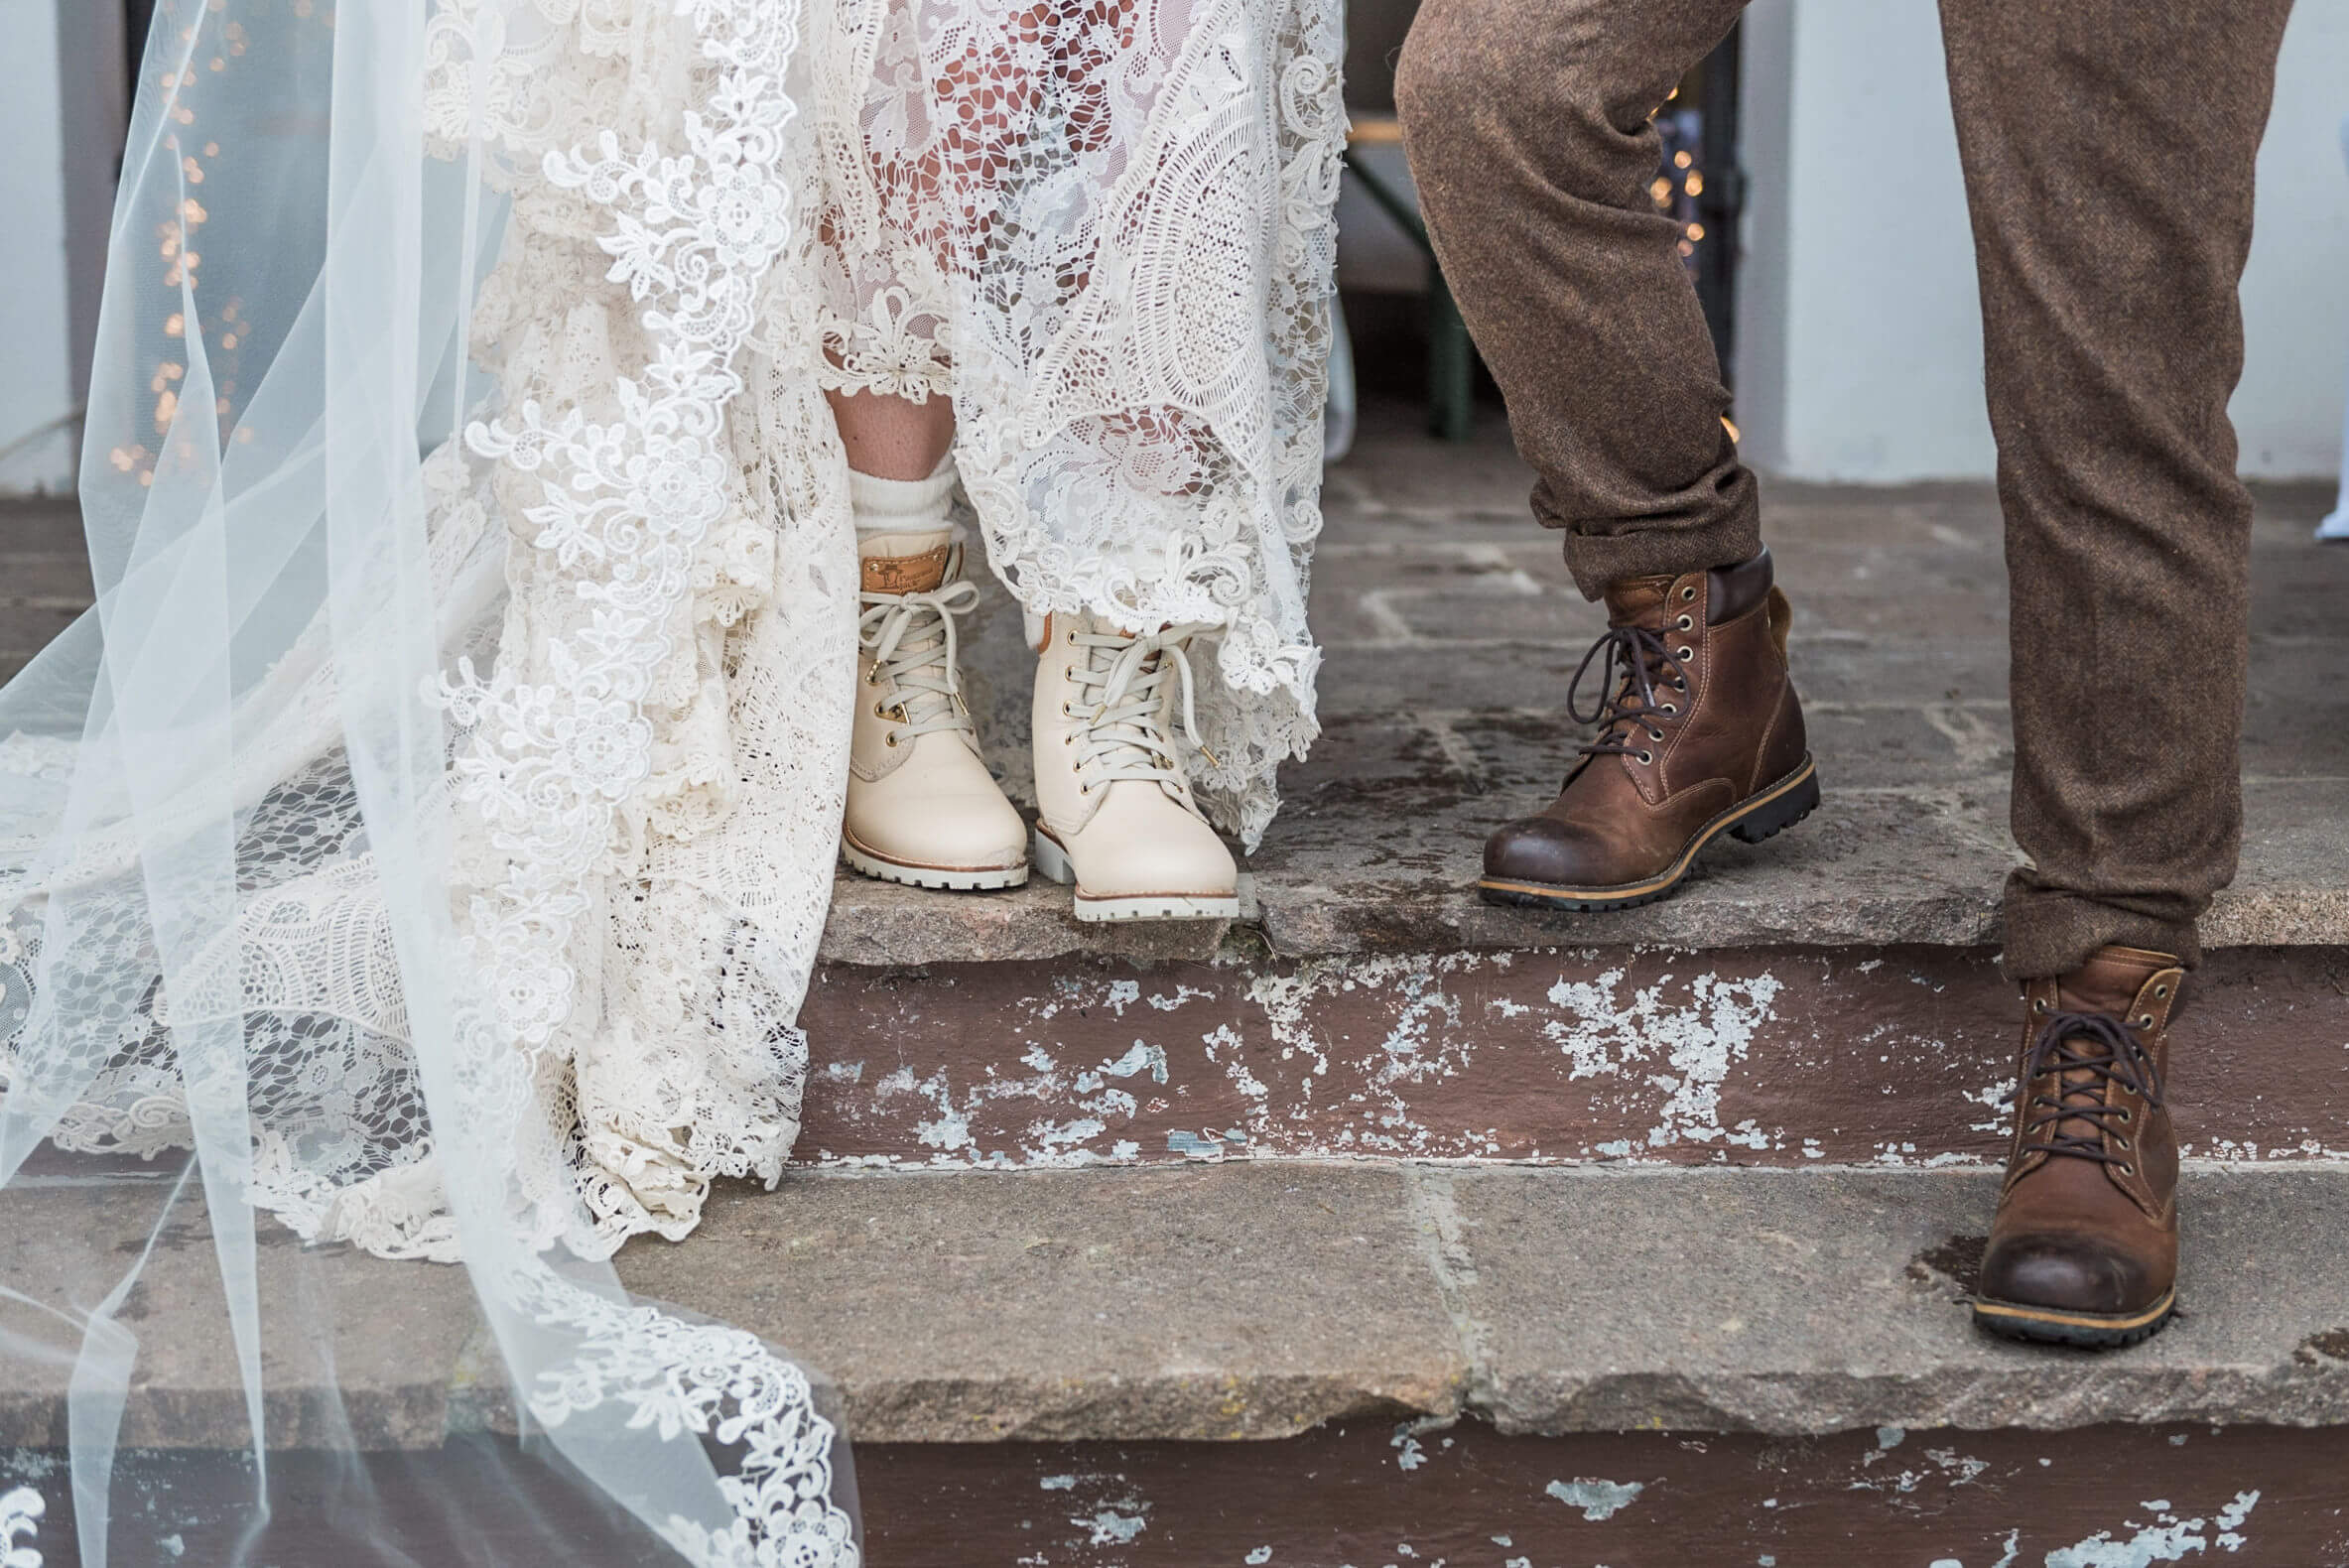 Shoes worn by a bride and groom at their destination winter wedding